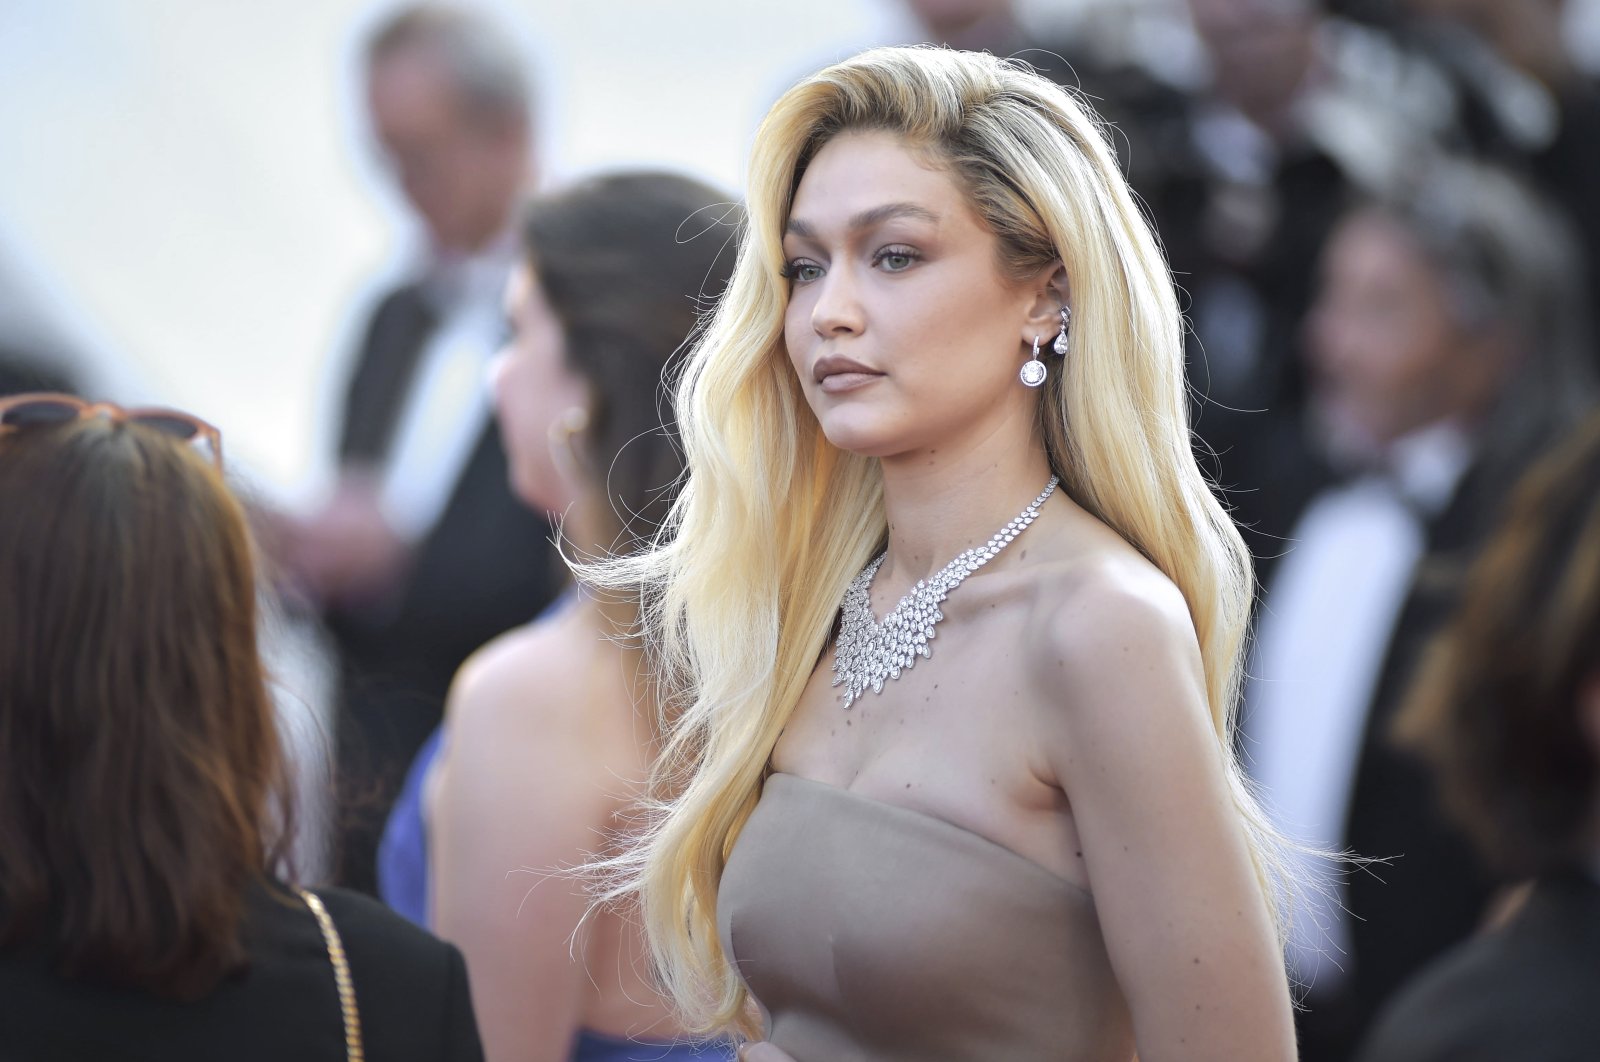 American model Gigi Hadid at Cannes Film Festival 2023, Cannes, France, May 21, 2023. (Getty Images Photo)